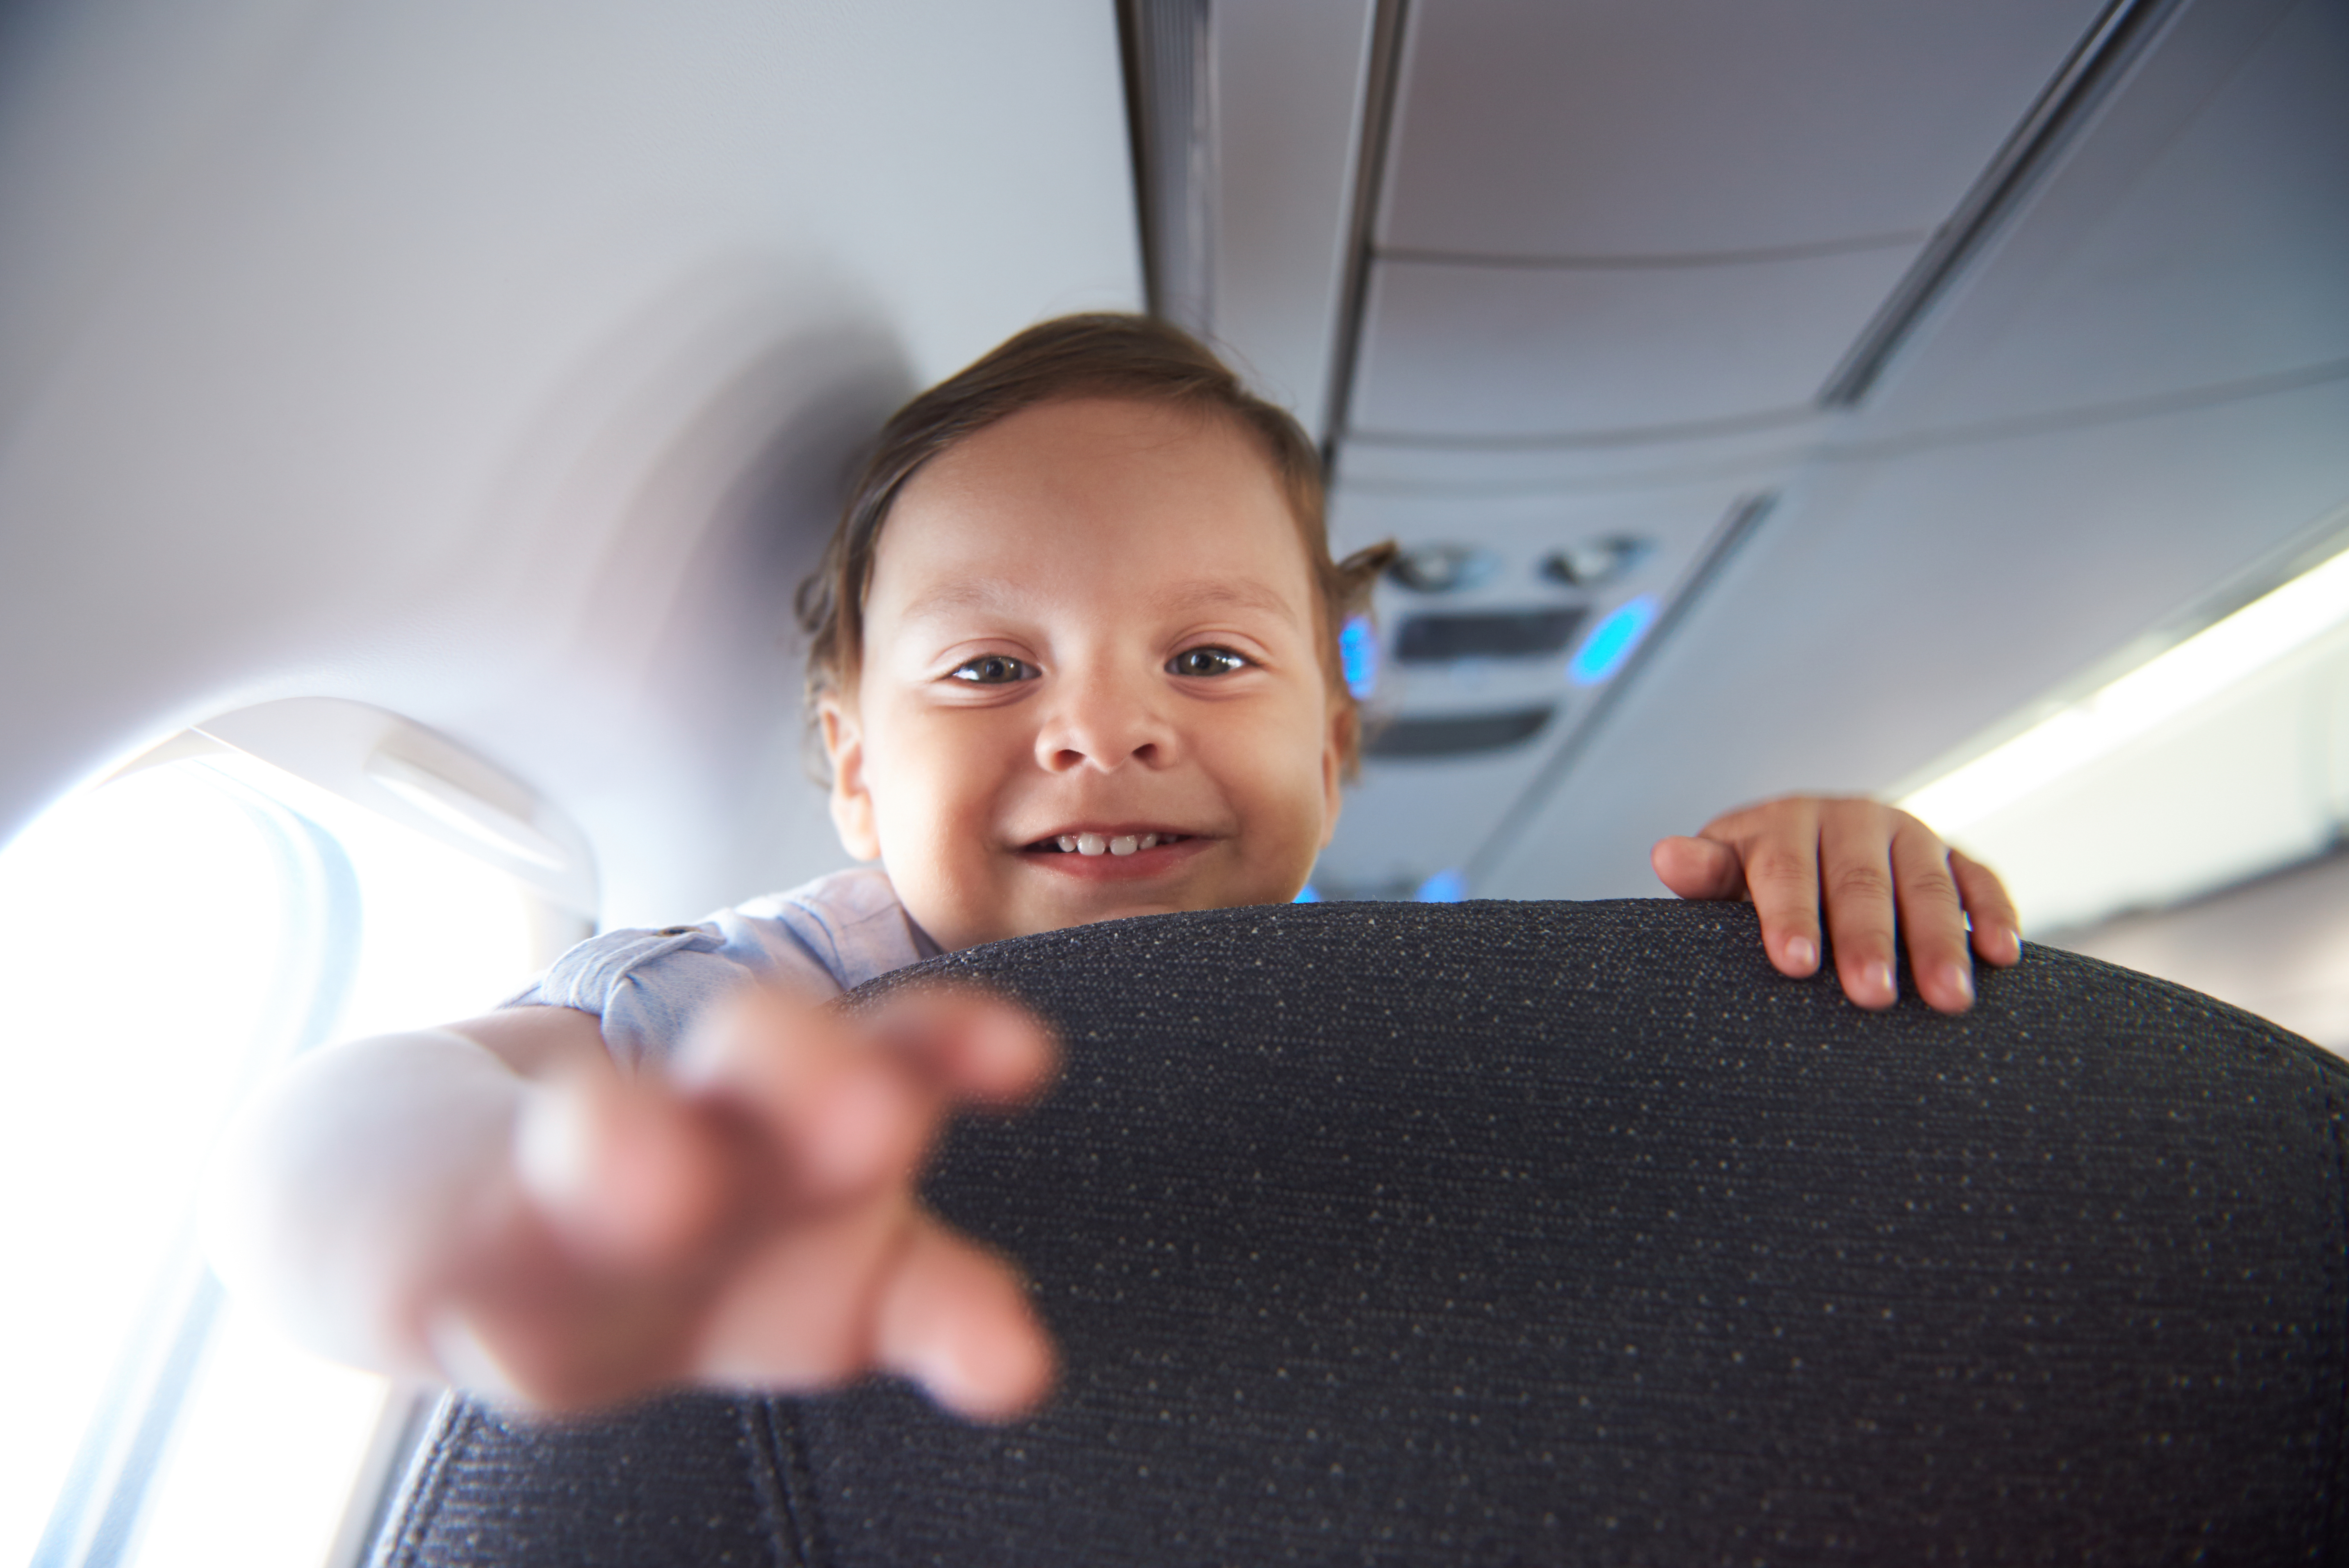 A baby in an airplane | Source: Shutterstock